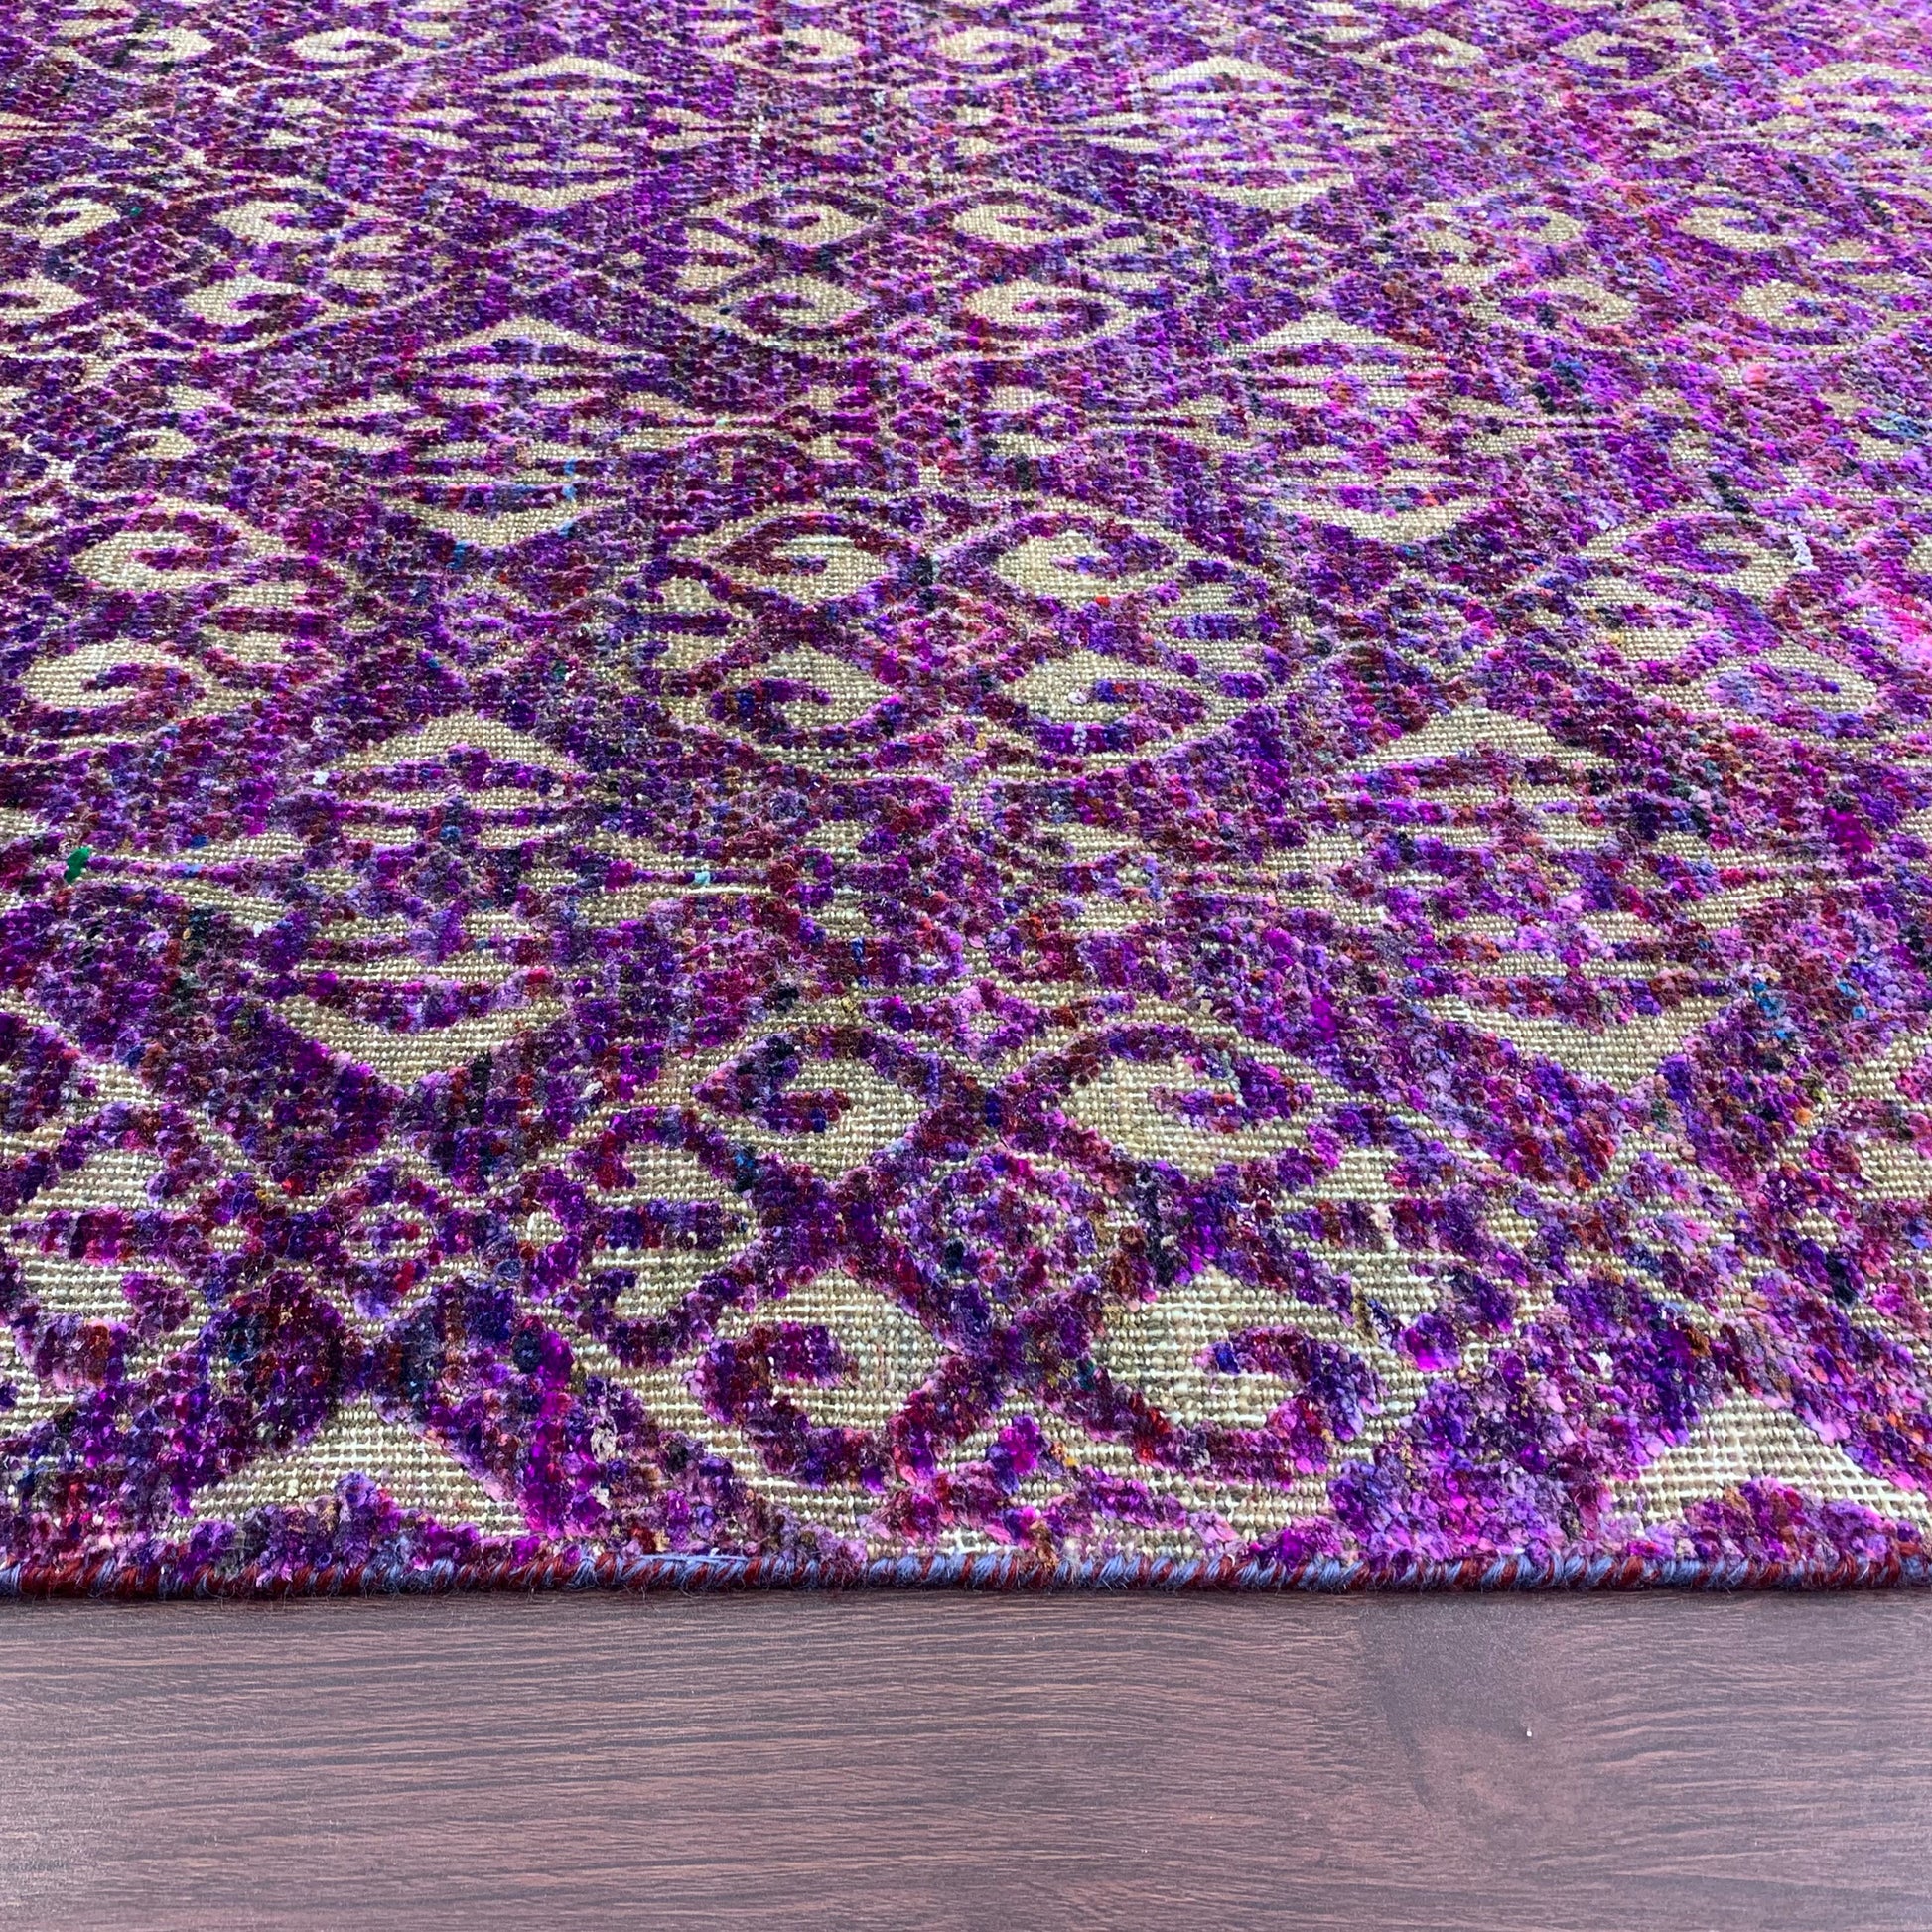 Get trendy with Pink Sari Silk and Wool Transitional Handknotted Area Rug 7.9x10.2ft 235x308Cms - Contemporary Rugs available at Jaipur Oriental Rugs. Grab yours for $4730.00 today!